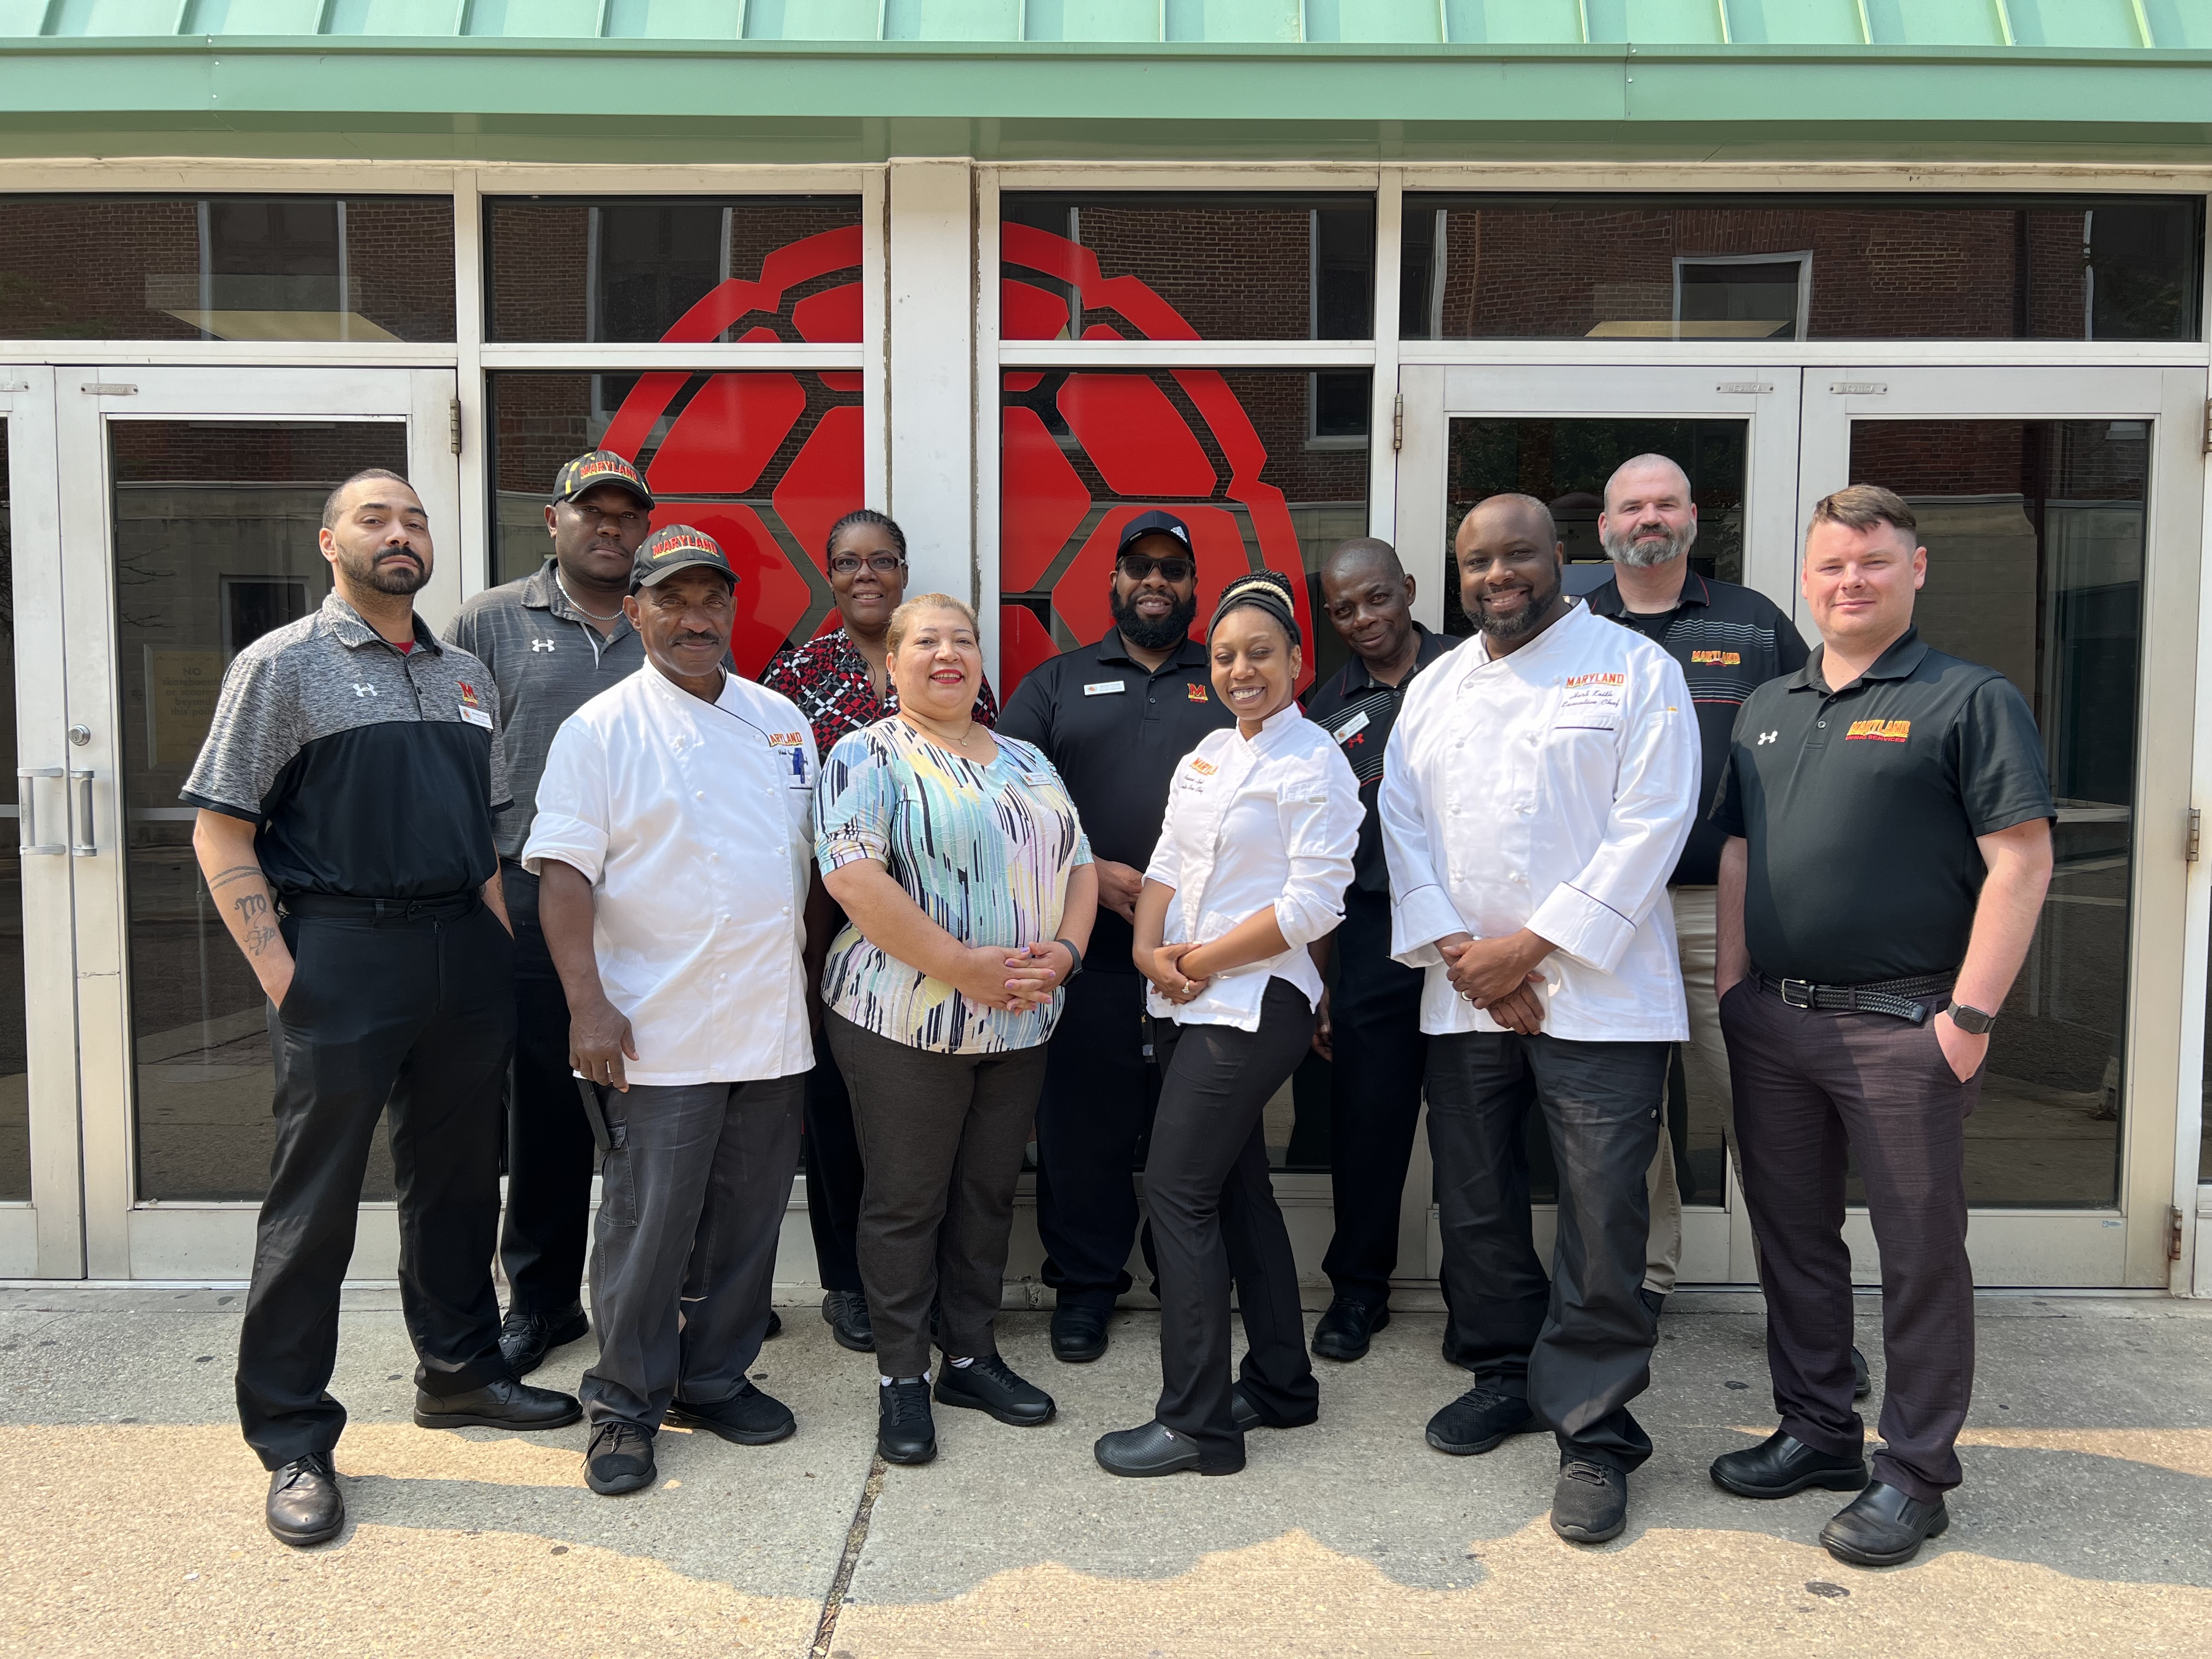 South Campus Dining Hall Management Team